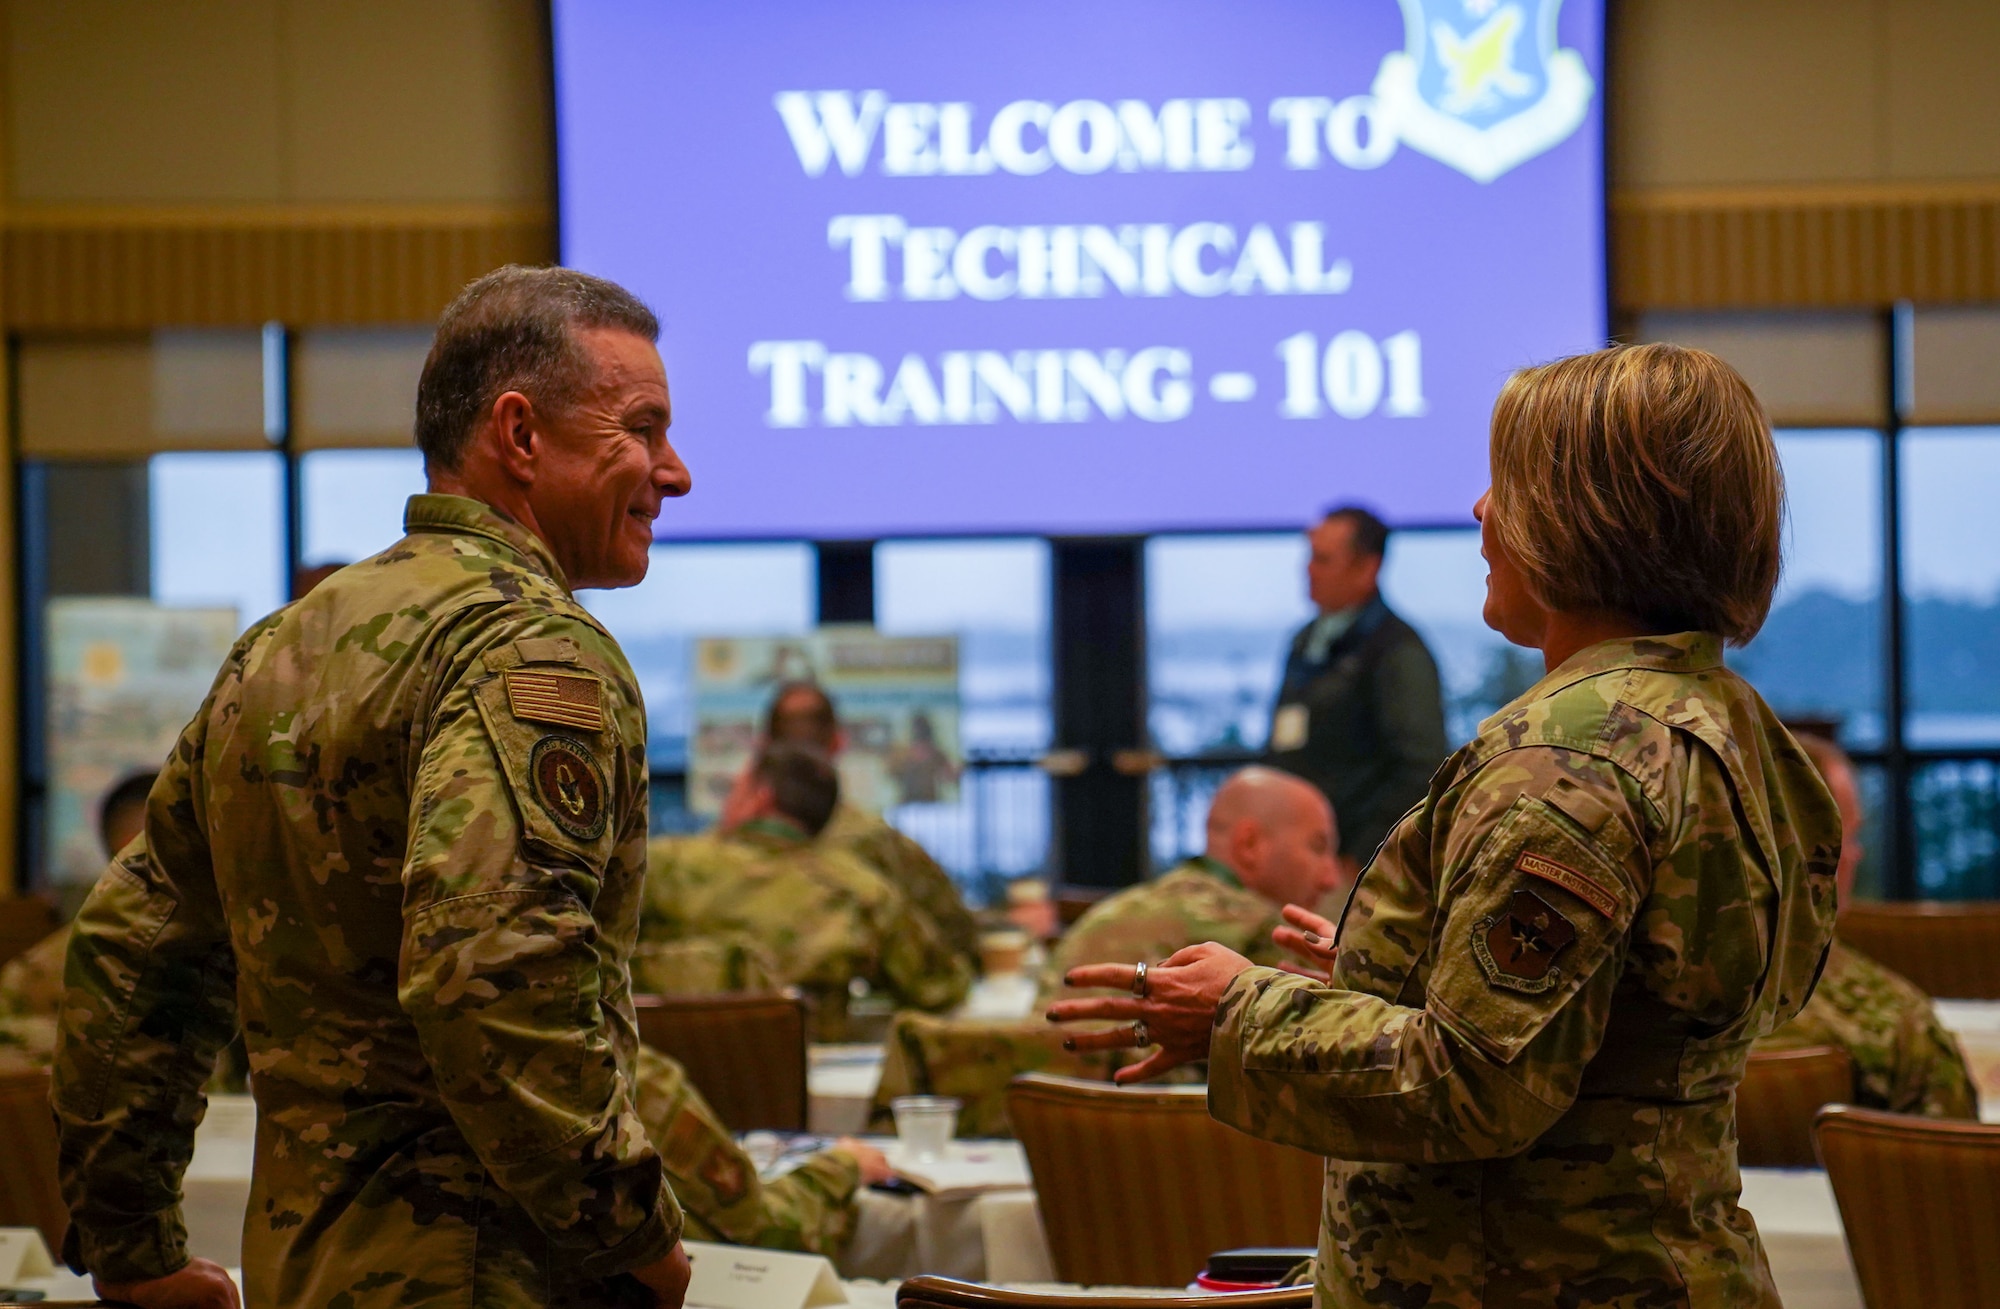 U.S. Air Force Col. Roderick Grunwald, Second Air Force mobilization assistant to the commander, and Chief Master Sgt. Katie McCool, Second Air Force command chief, speak before the start of Technical Training 101 in the Bay Breeze Event Center on Keesler Air Force Base, Mississippi, March 28, 2023.